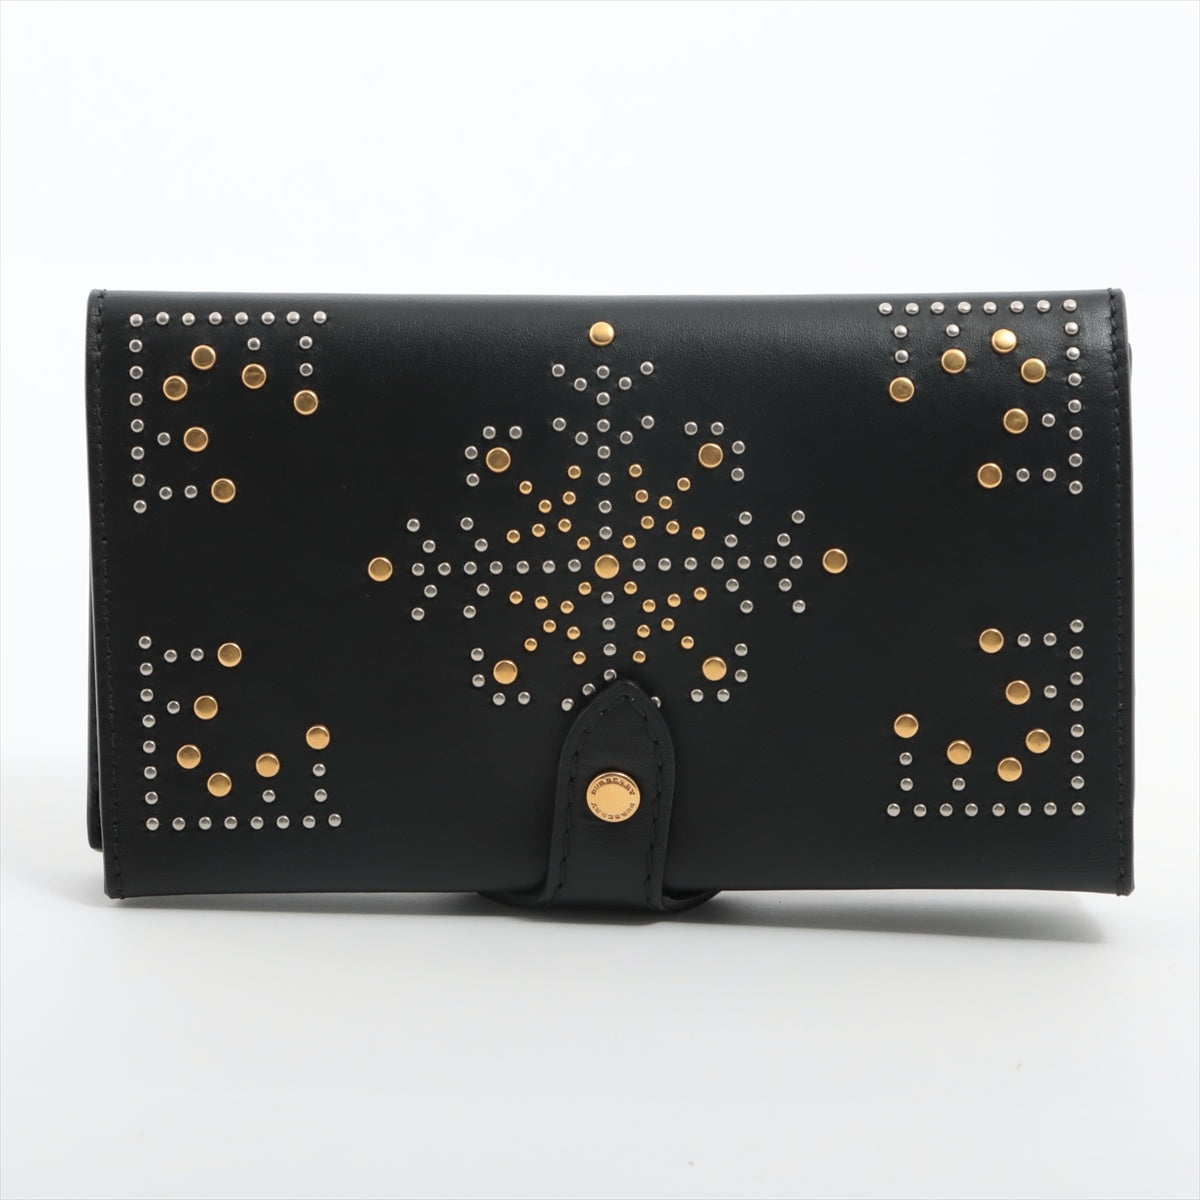 Burberry Studs Leather Wallet Black